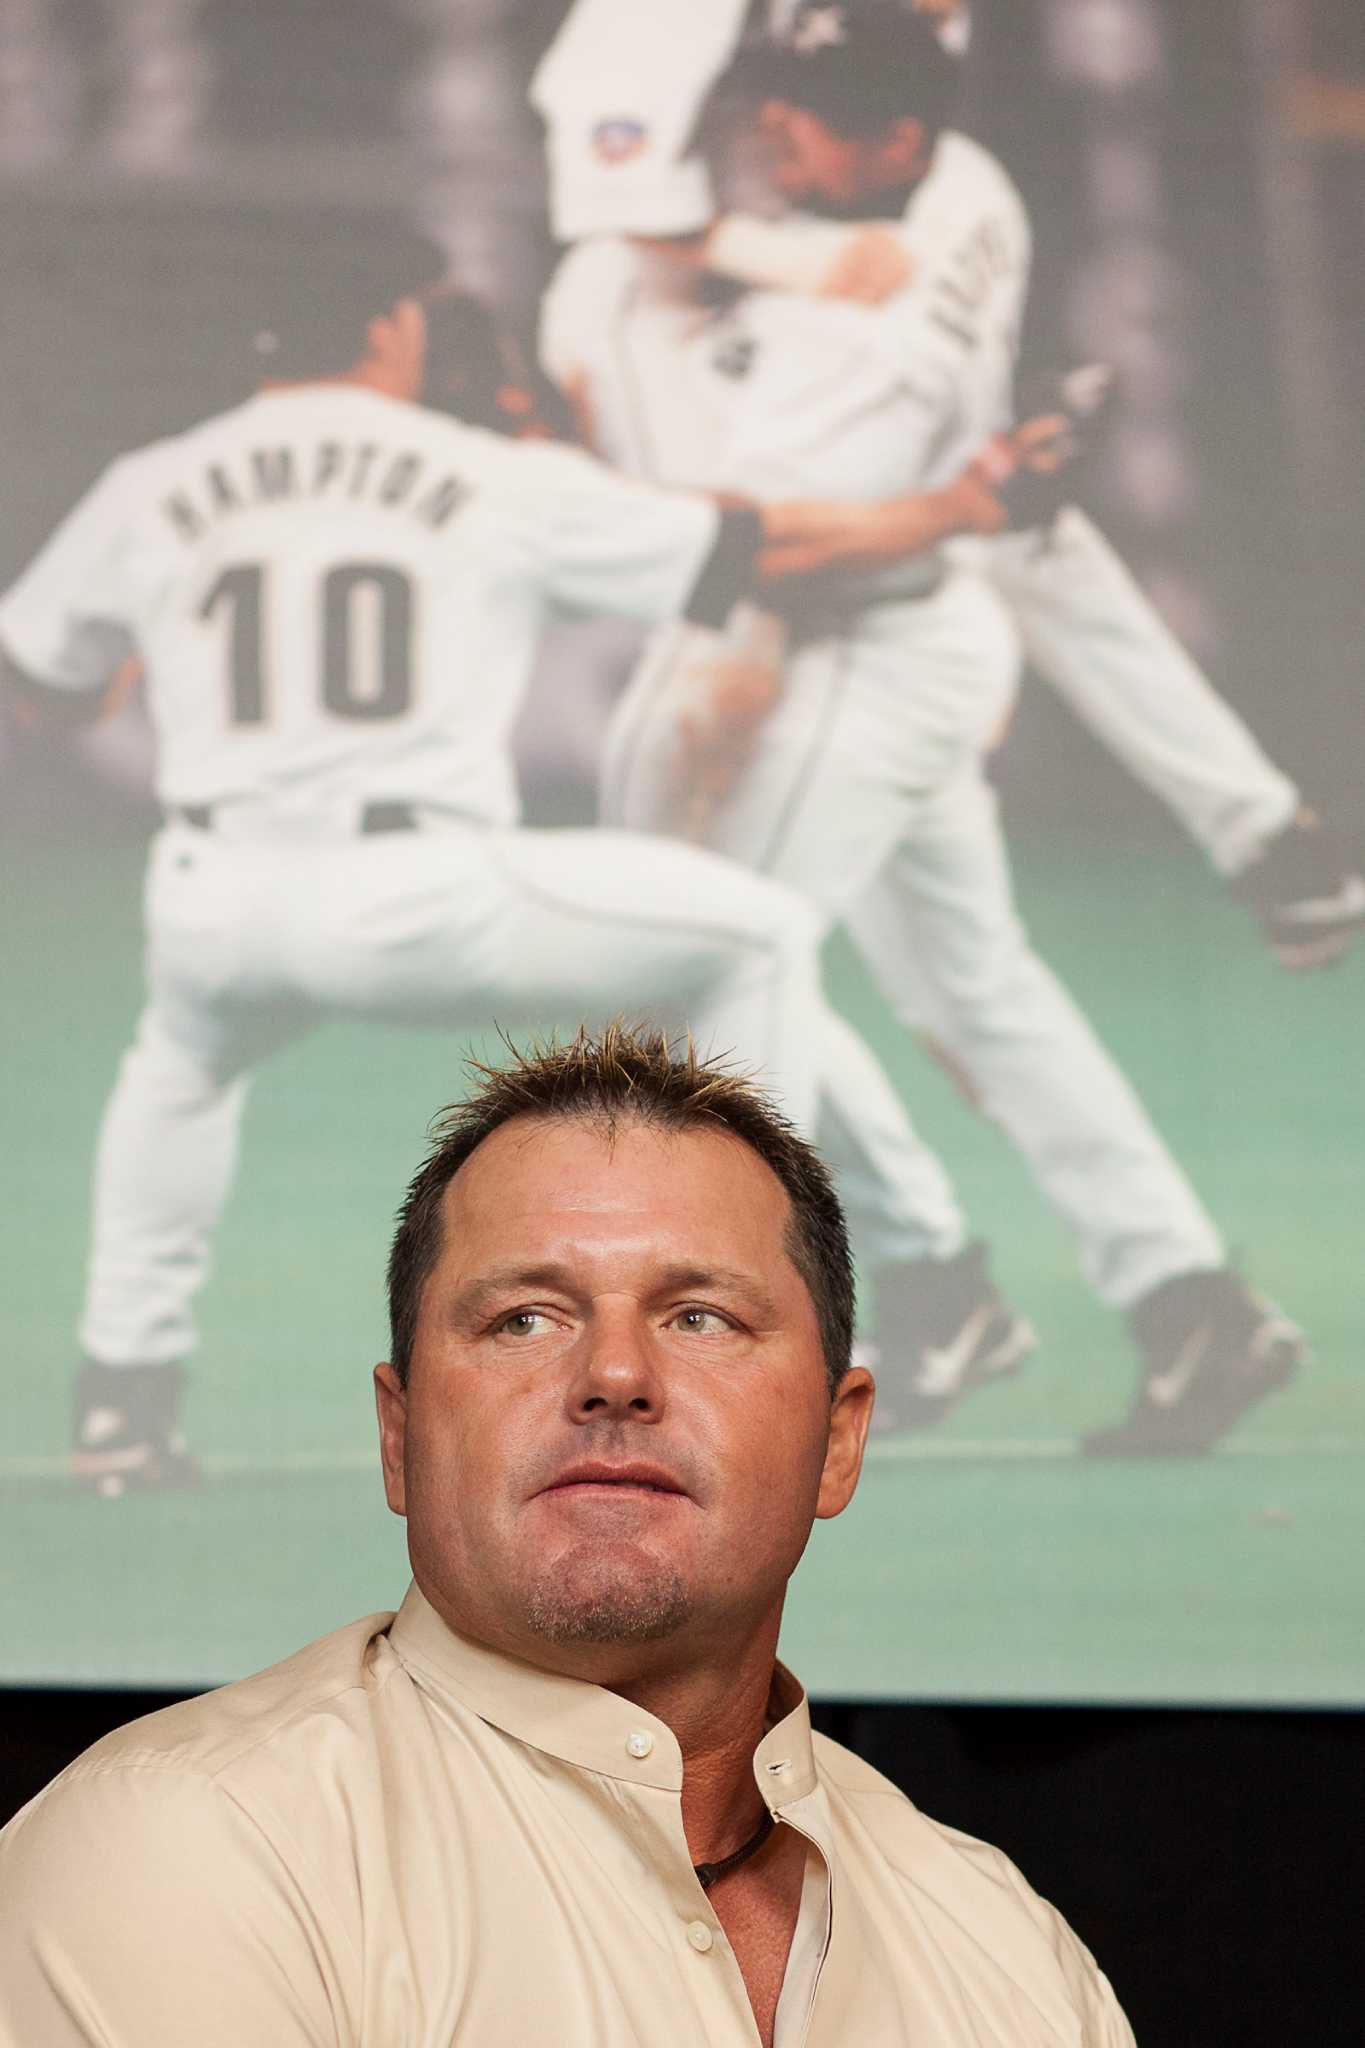 Roger Clemens, Craig Biggio, Andy Pettitte's sons drafted by MLB